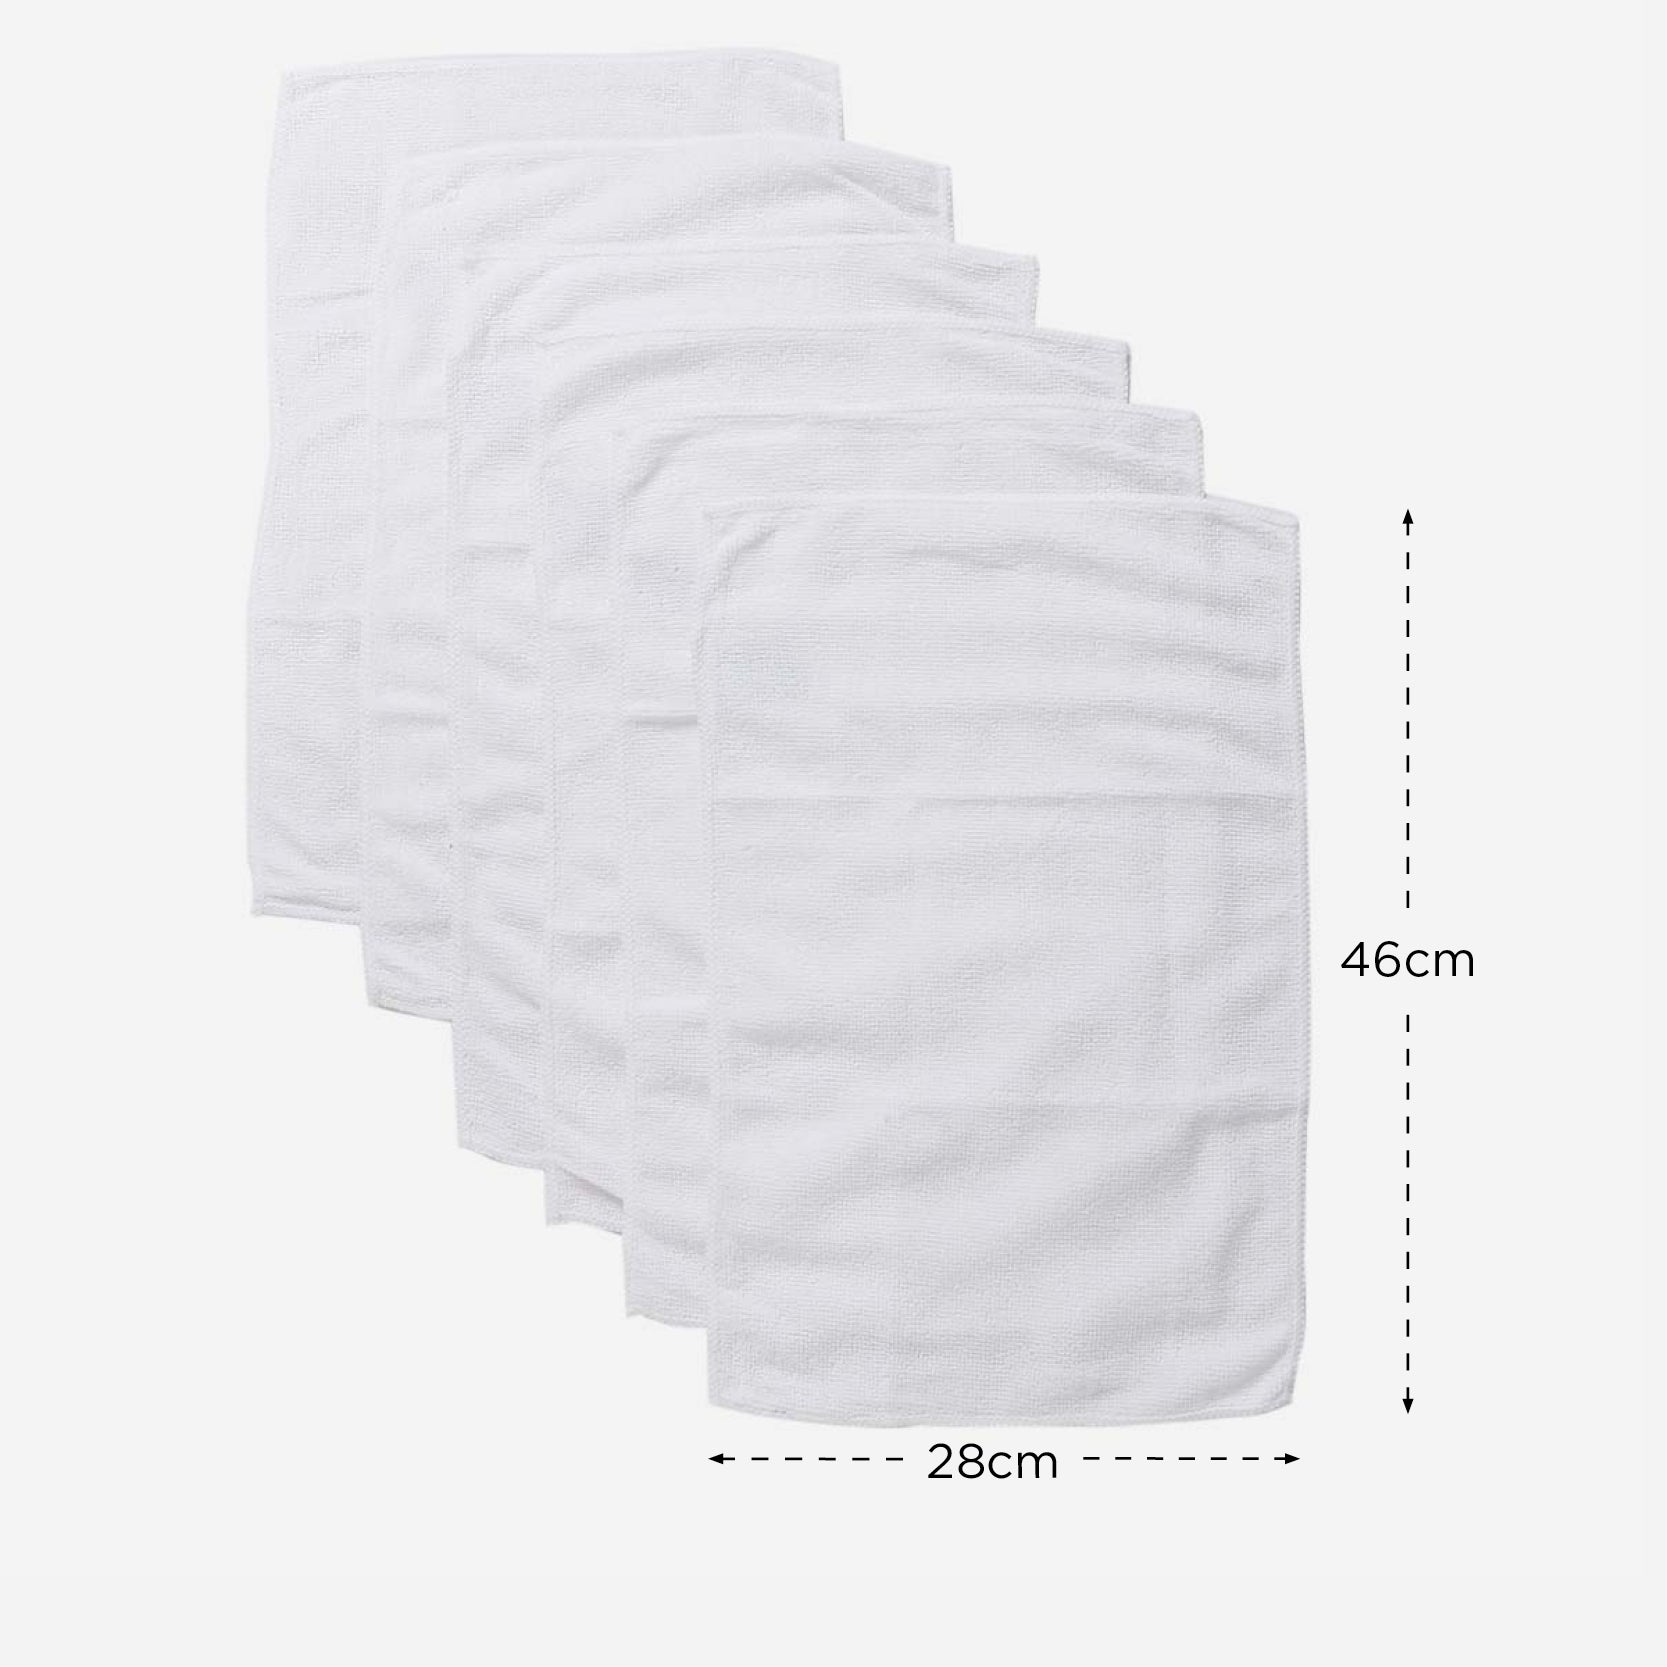 SM Home Micro Hand Towel 6 pc set (White) - 11x18in